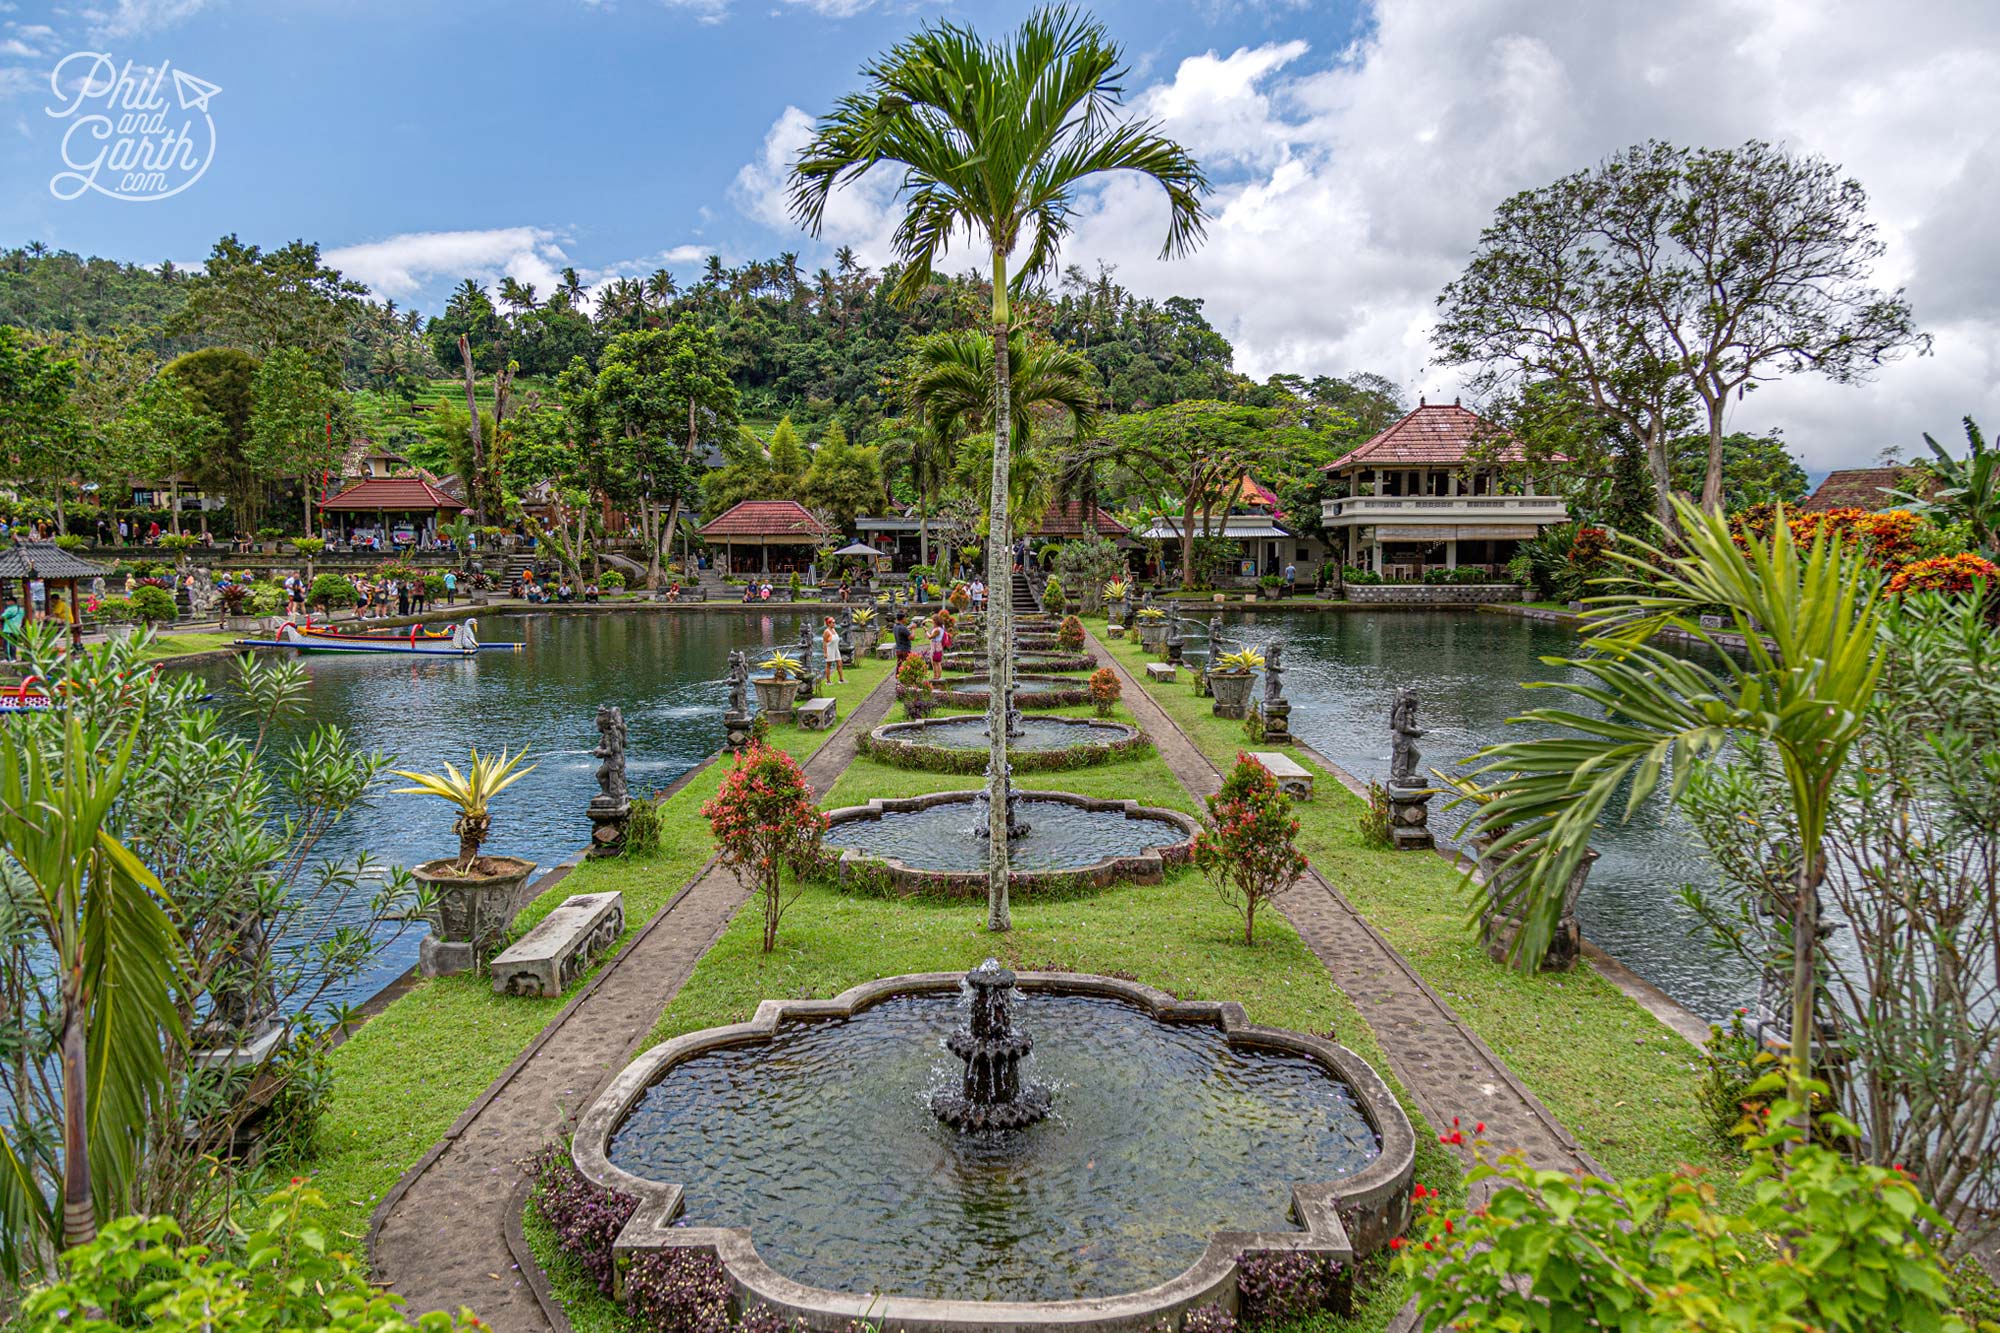 Tirta Gangga is a classic Instagrammable spot in Bali